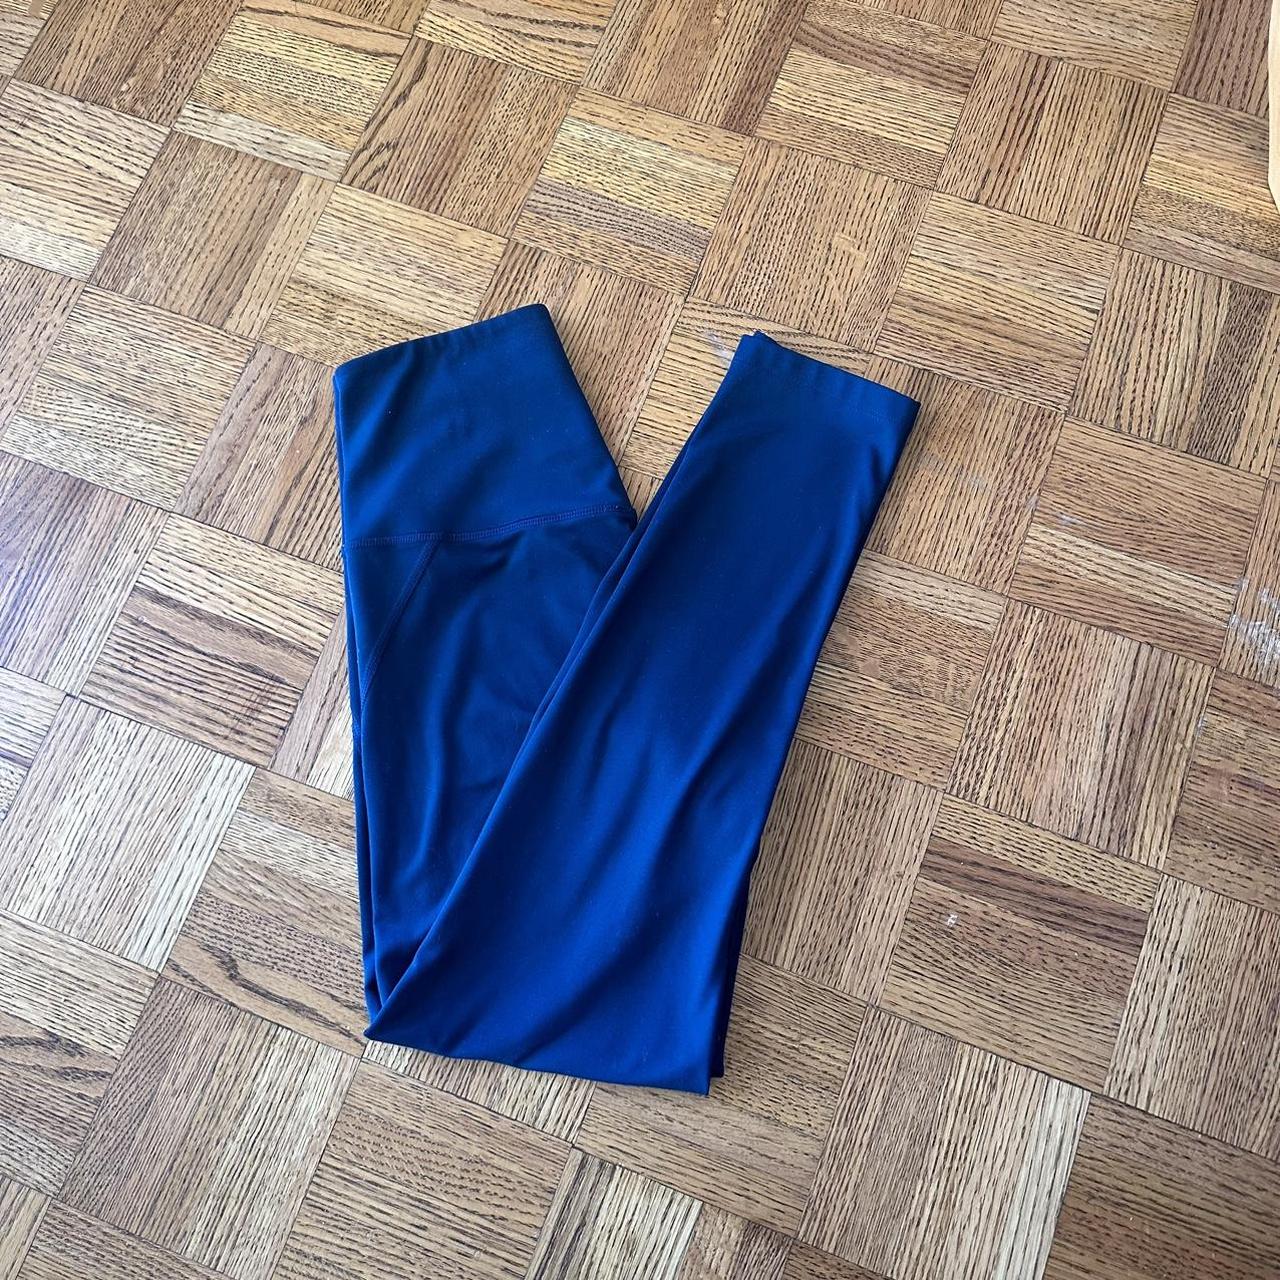 Girlfriend collective leggings in the globe color